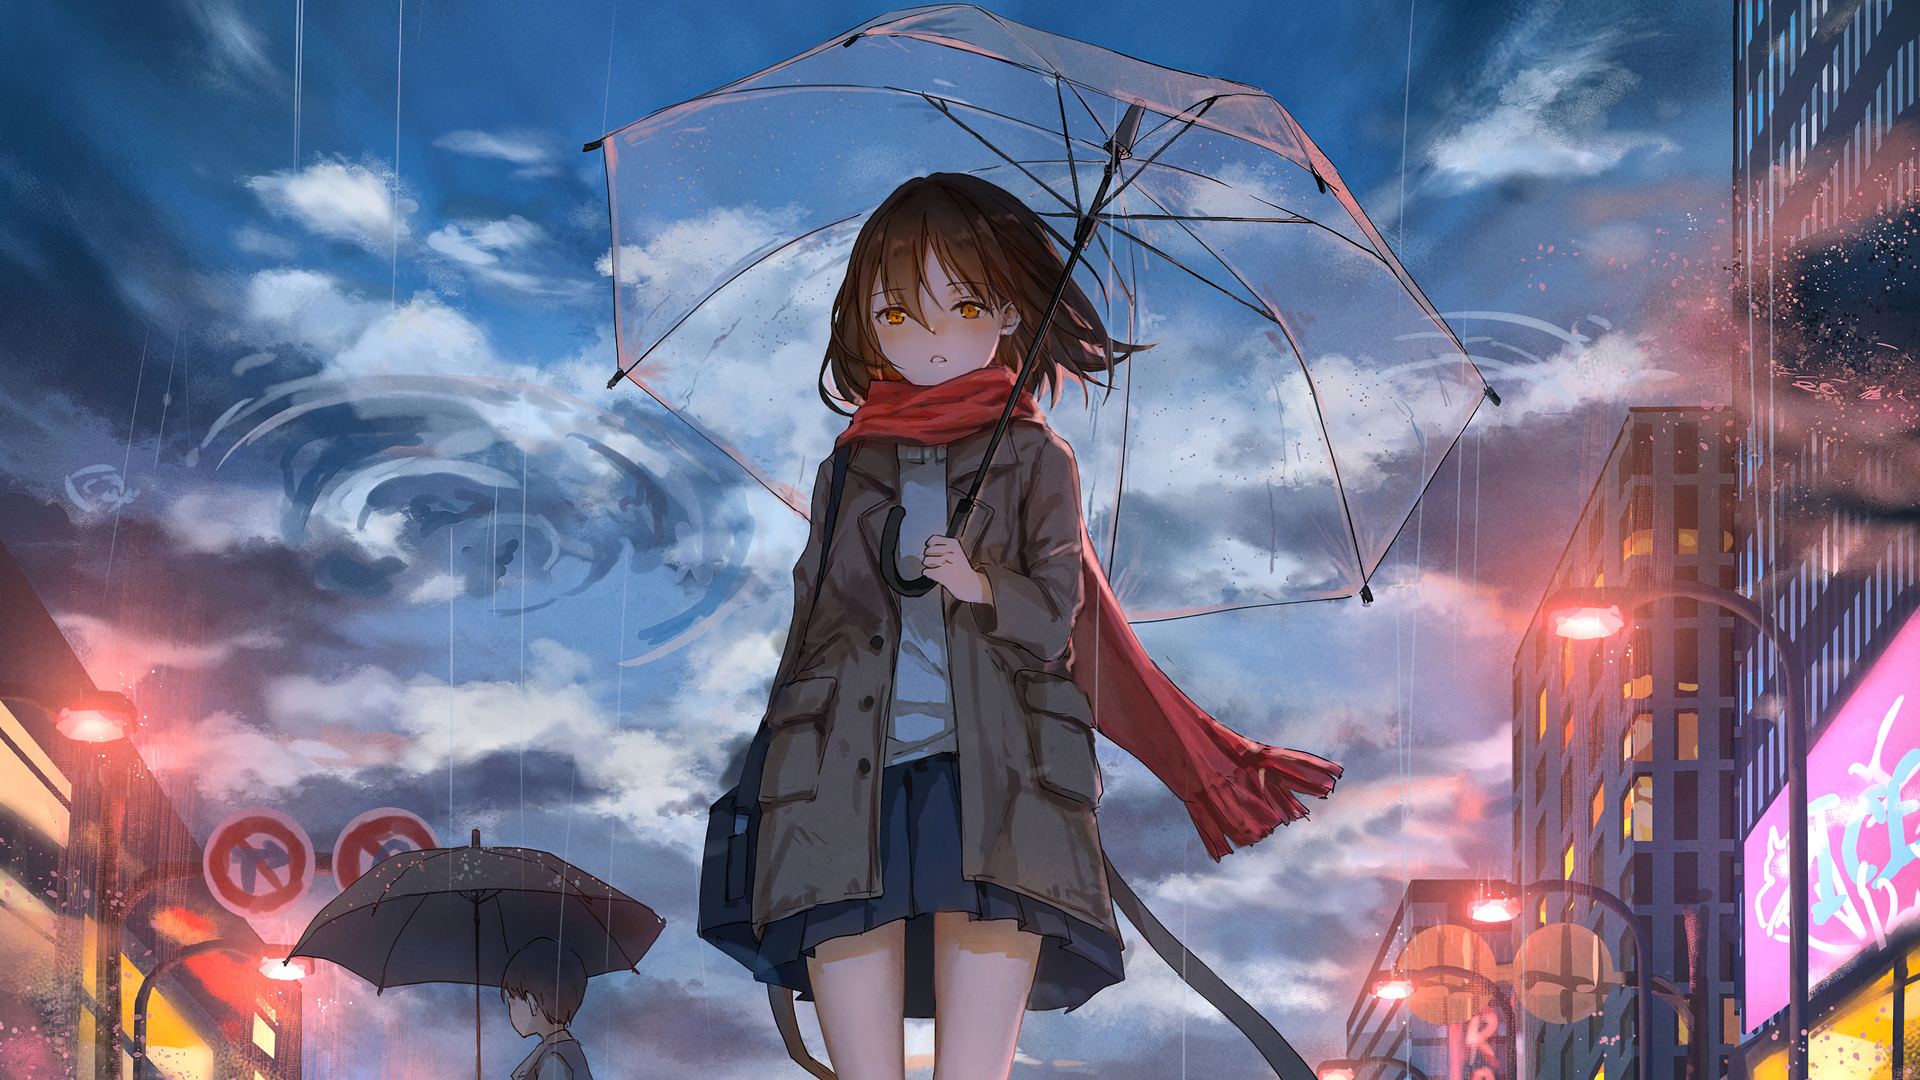 Anime Girl Walking In Rain With Umbrella 4k Laptop Full HD 1080P HD 4k Wallpaper, Image, Background, Photo and Picture